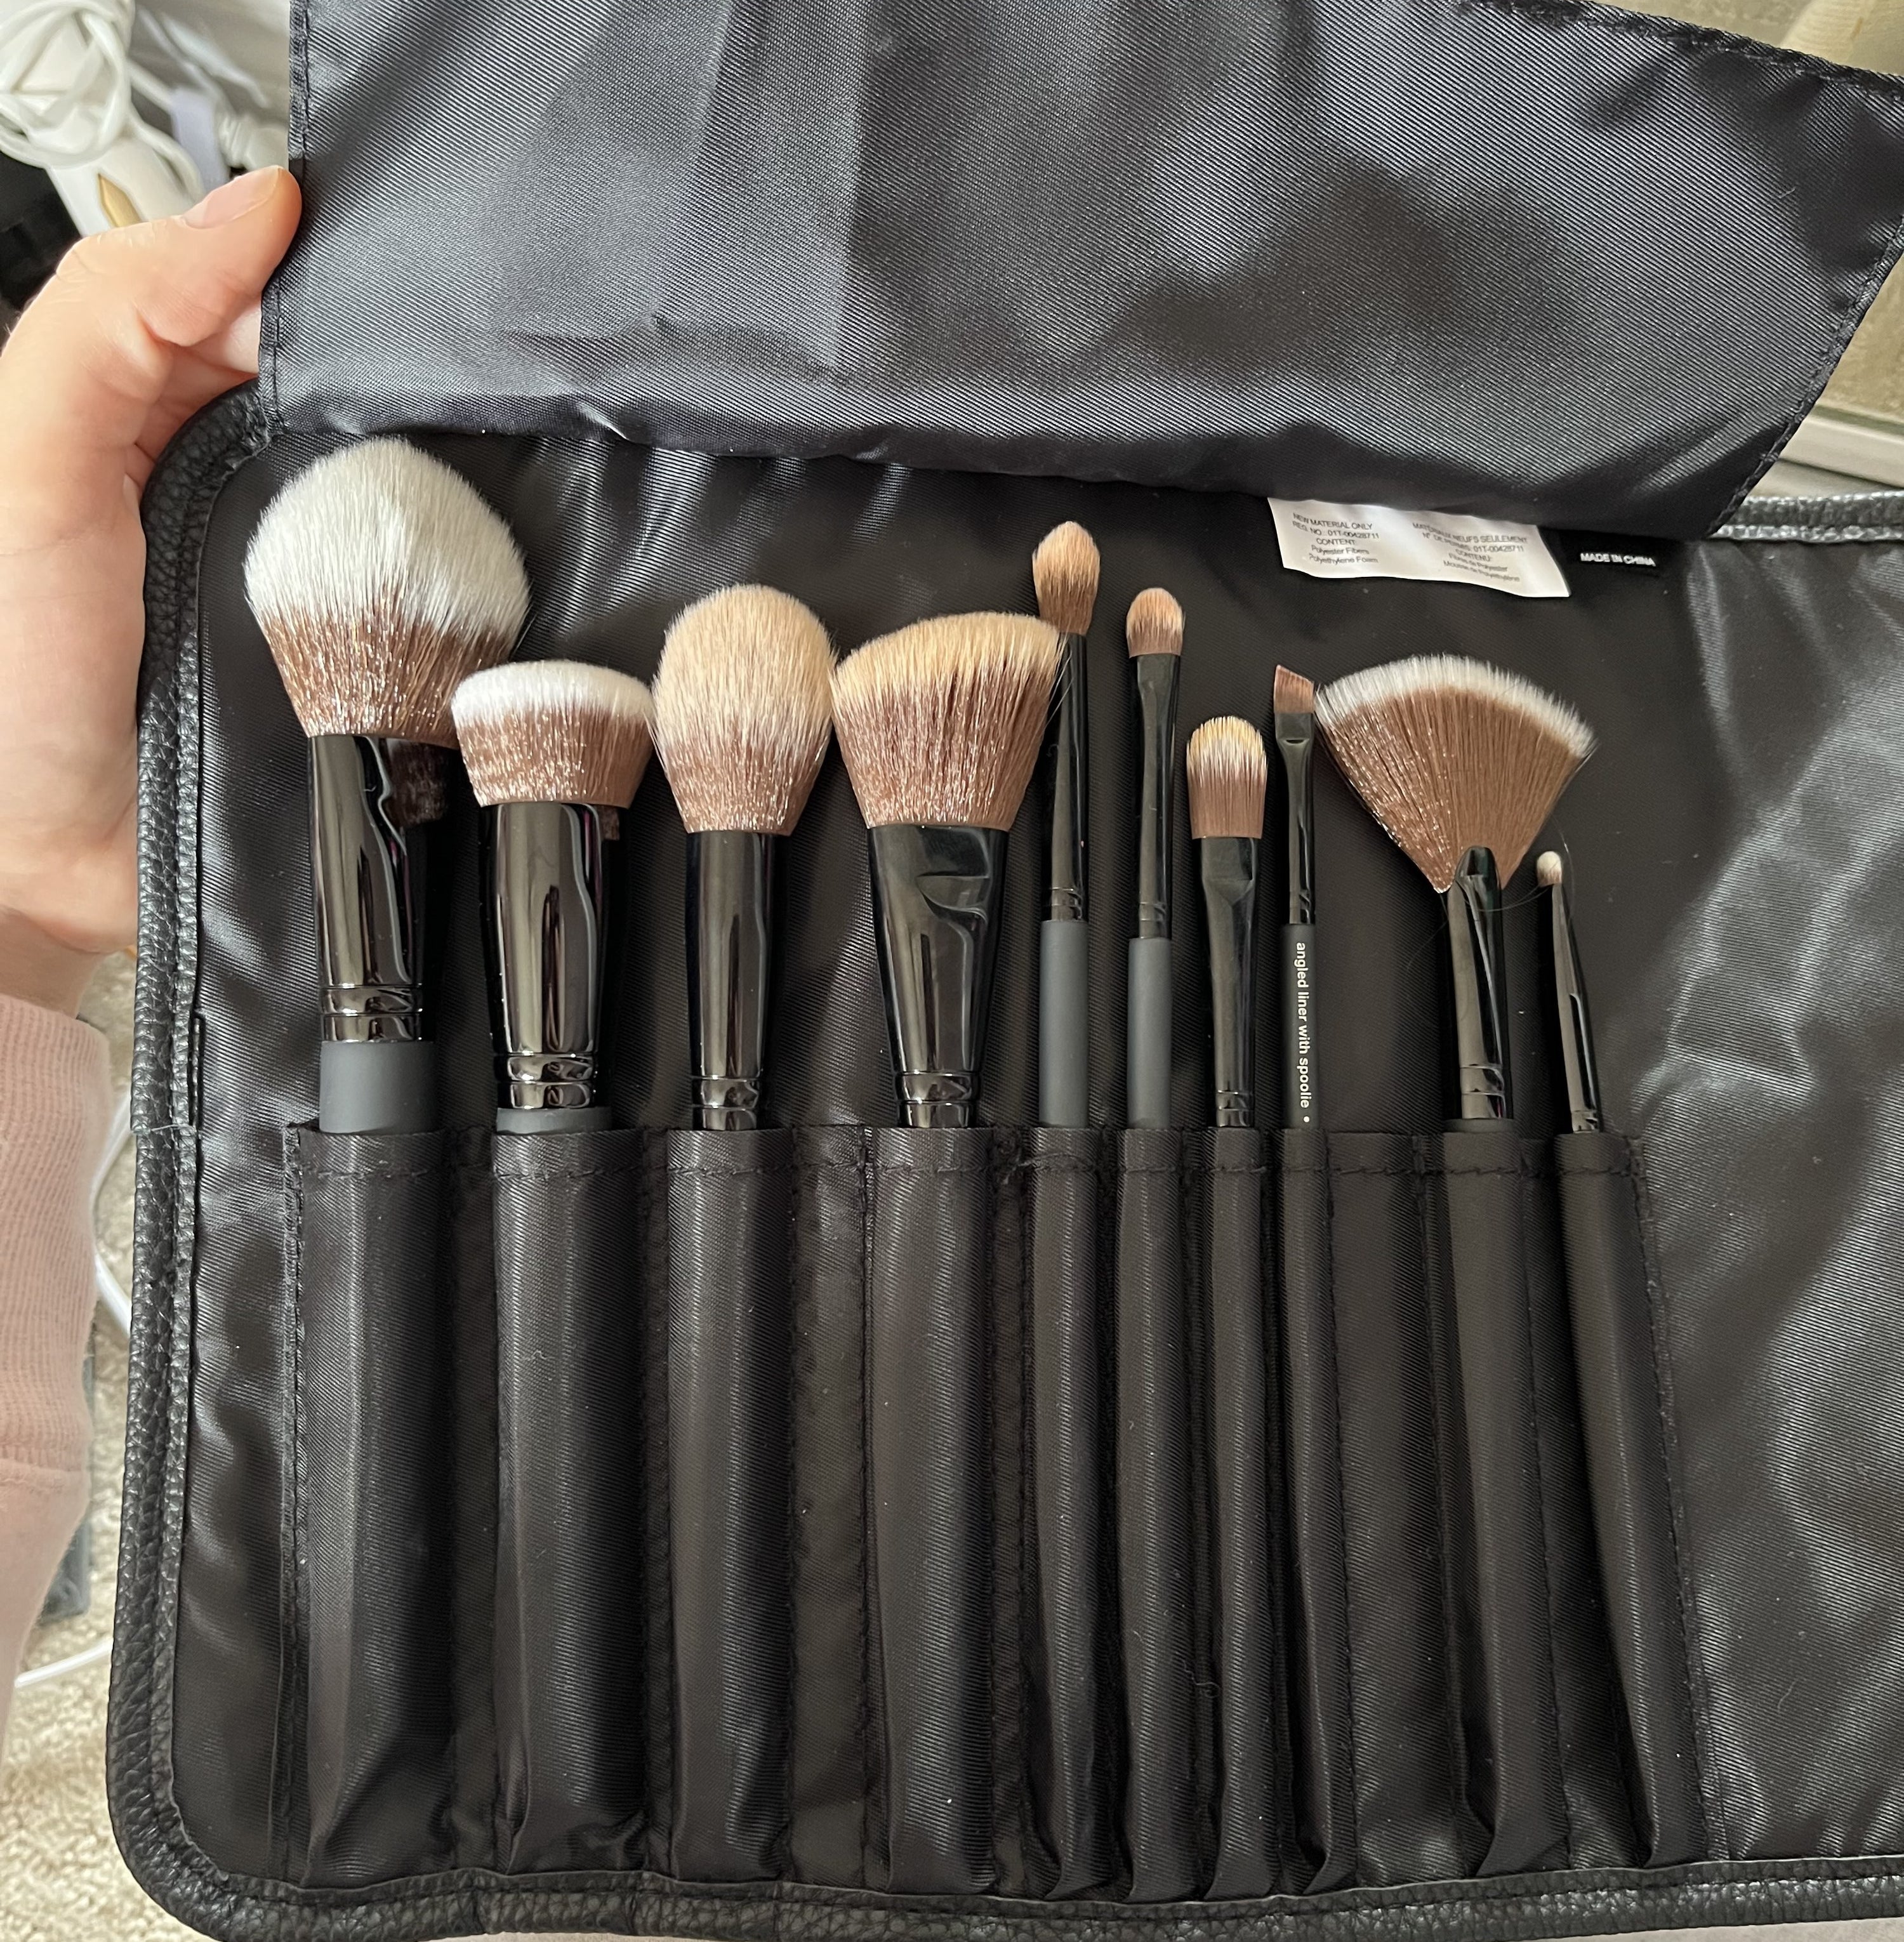 the brush set open displaying the brushes in the leather case